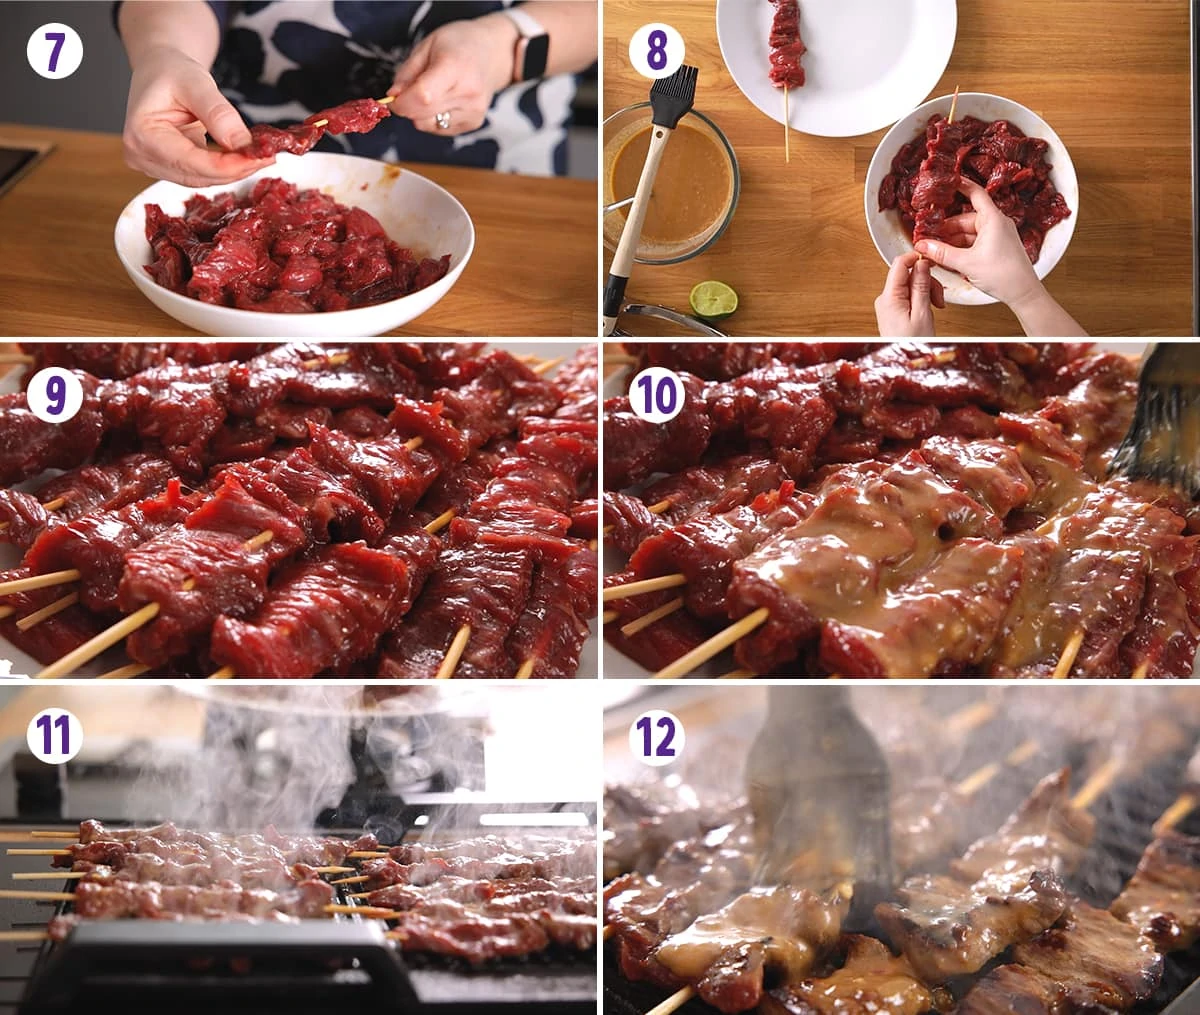 6 image collage showing final steps for making beef satay